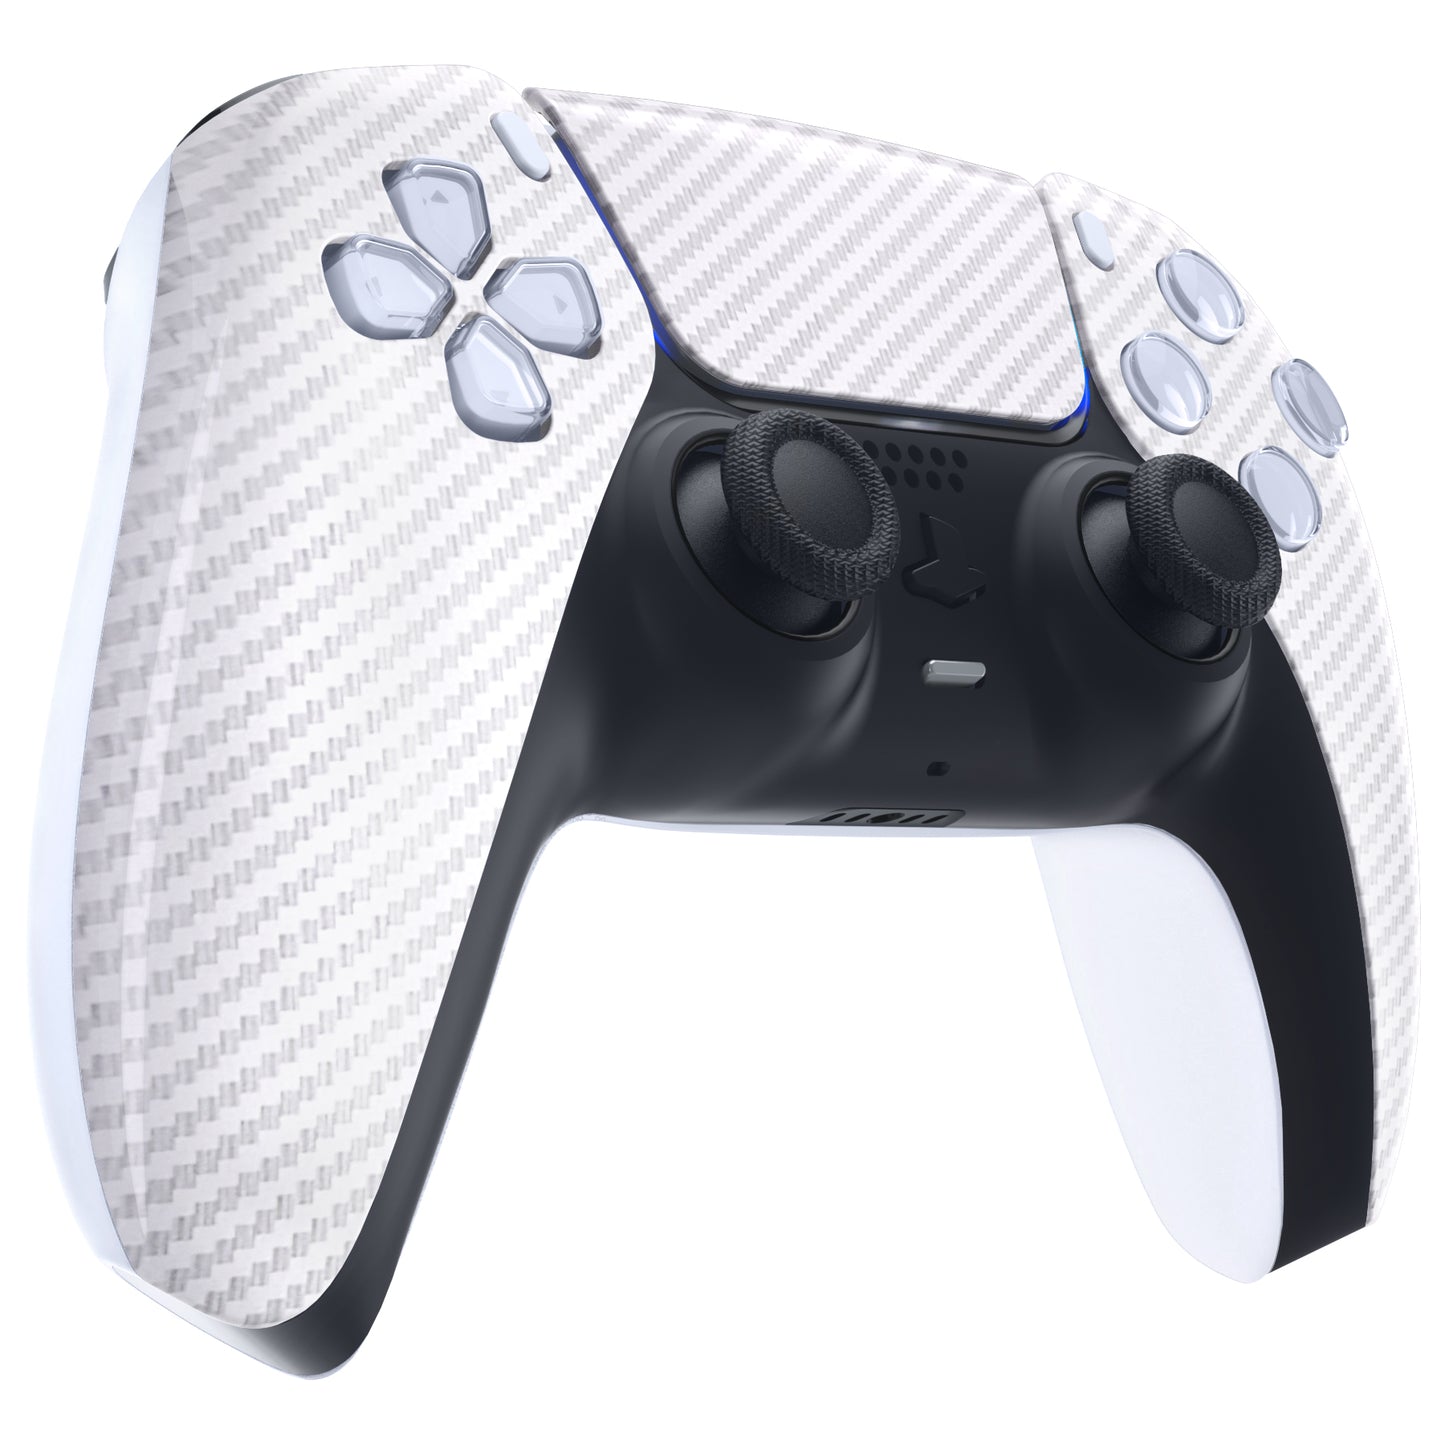 eXtremeRate Replacement Front Housing Shell with Touchpad Compatible with PS5 Controller BDM-010/020/030/040 - White Silver Carbon Fiber eXtremeRate